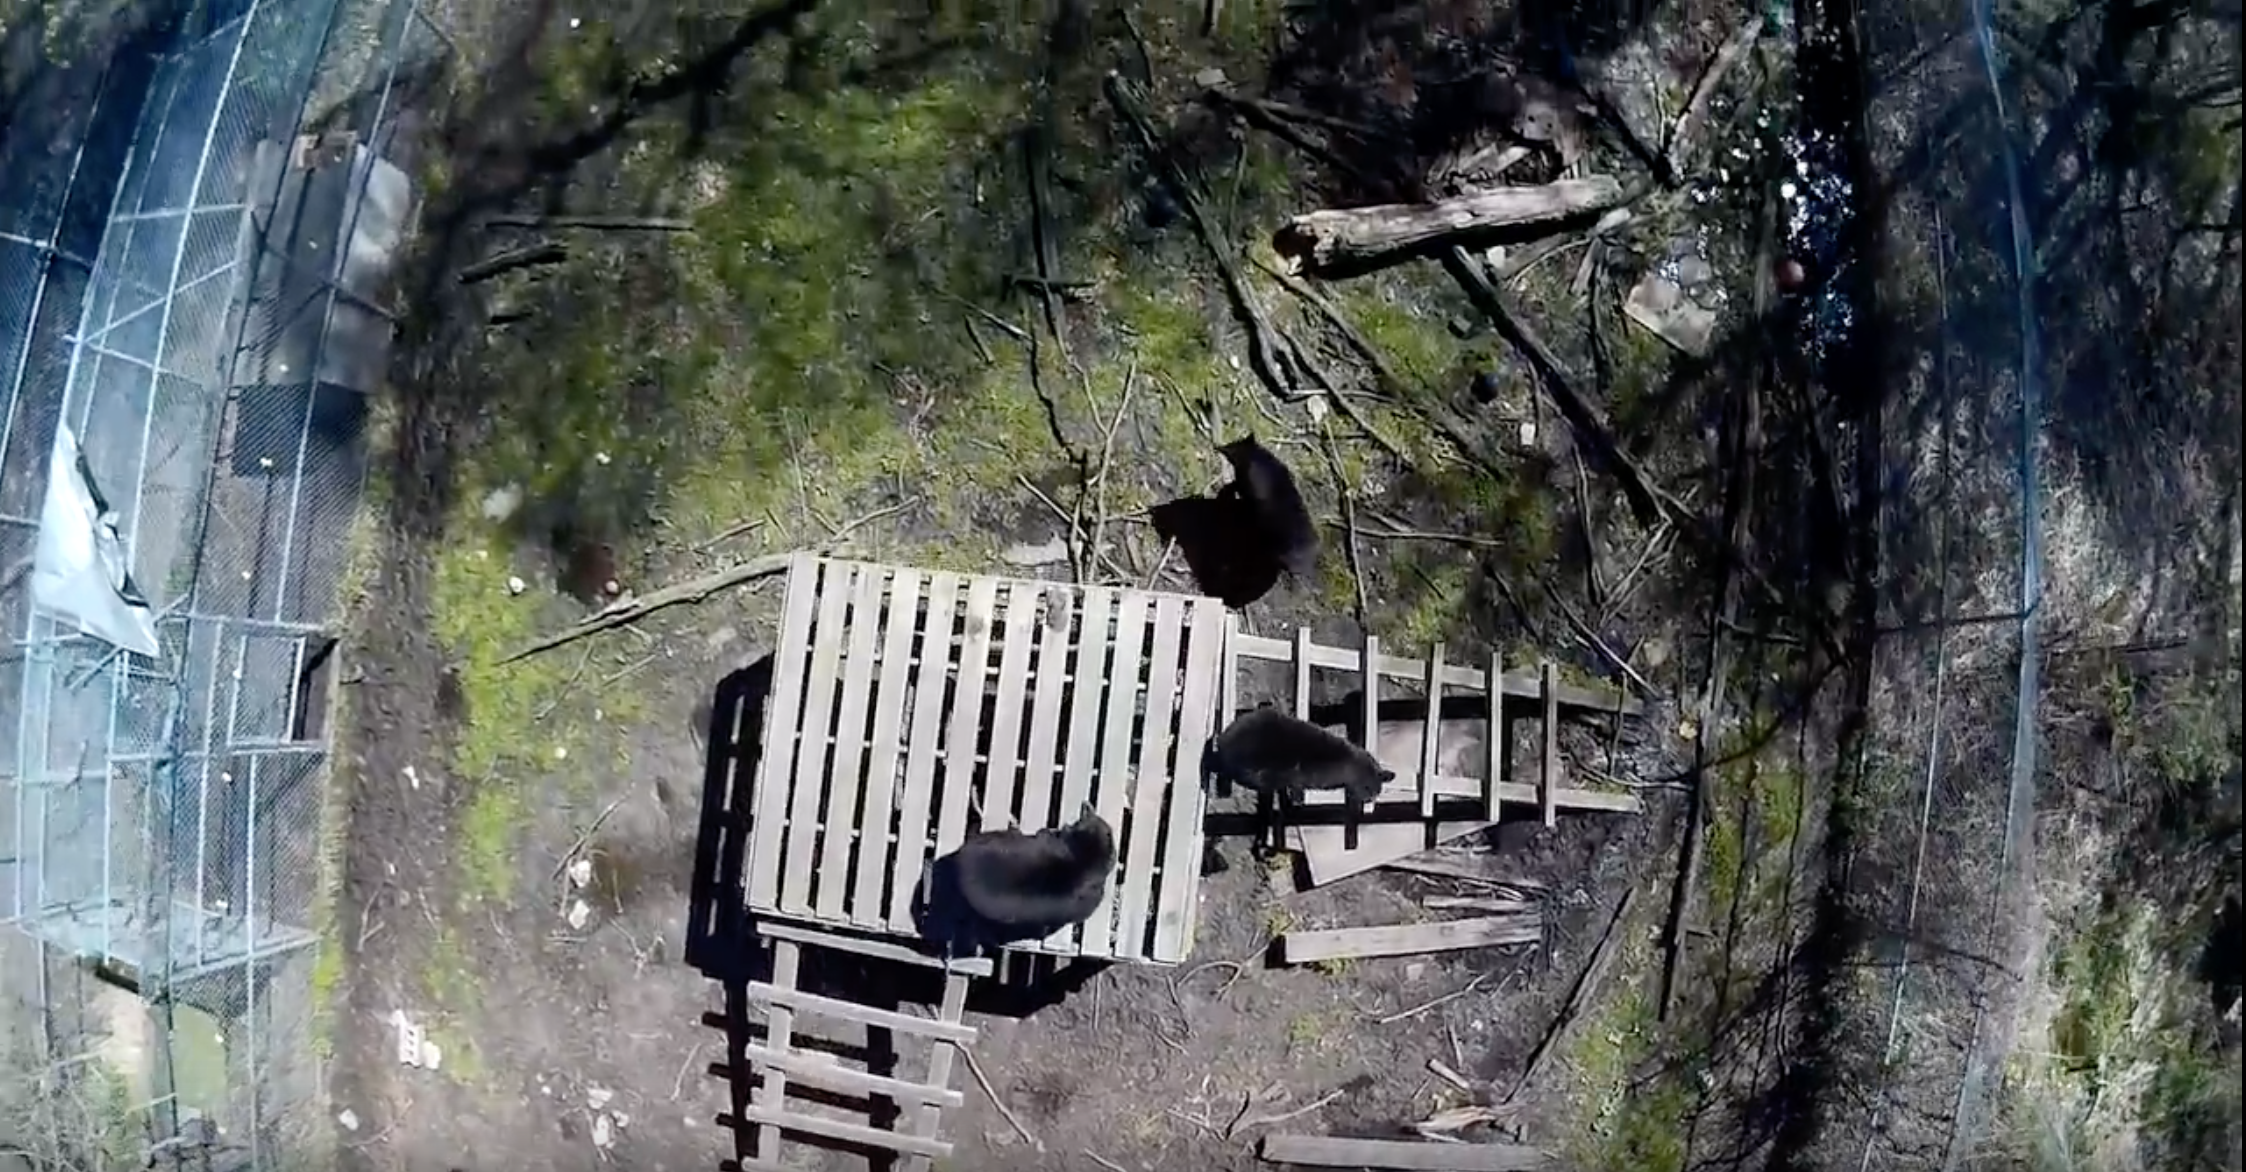 Drone's view of bears in enclosure